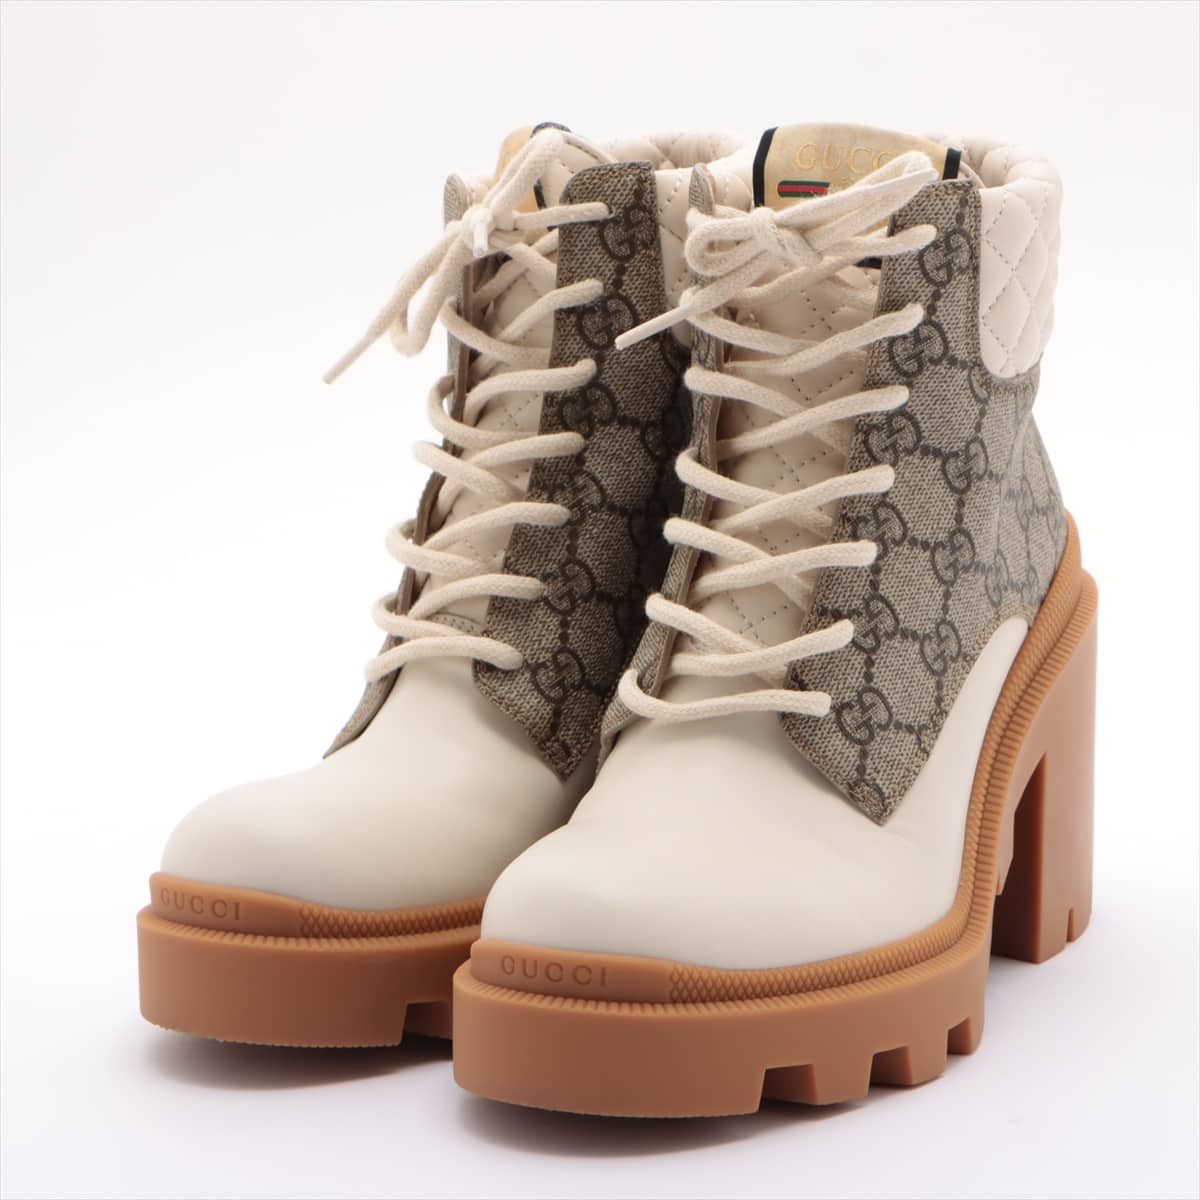 Gucci GG Supreme 21AW Canvas & leather Boots 37 Ladies' Beige 659691